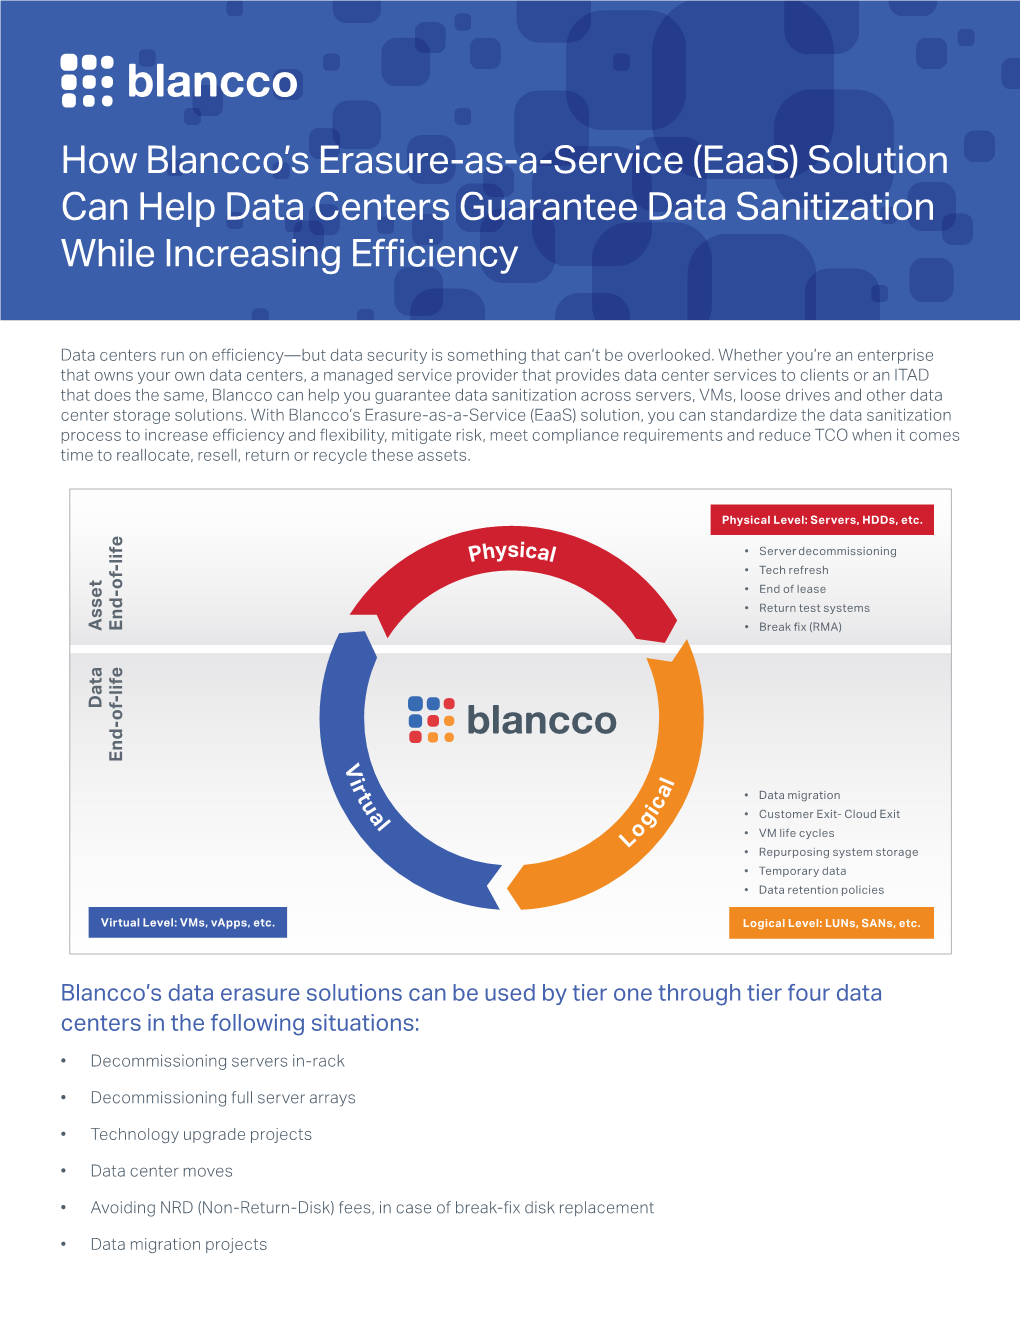 How Blancco's Erasure-As-A-Service (Eaas) Solution Can Help Data